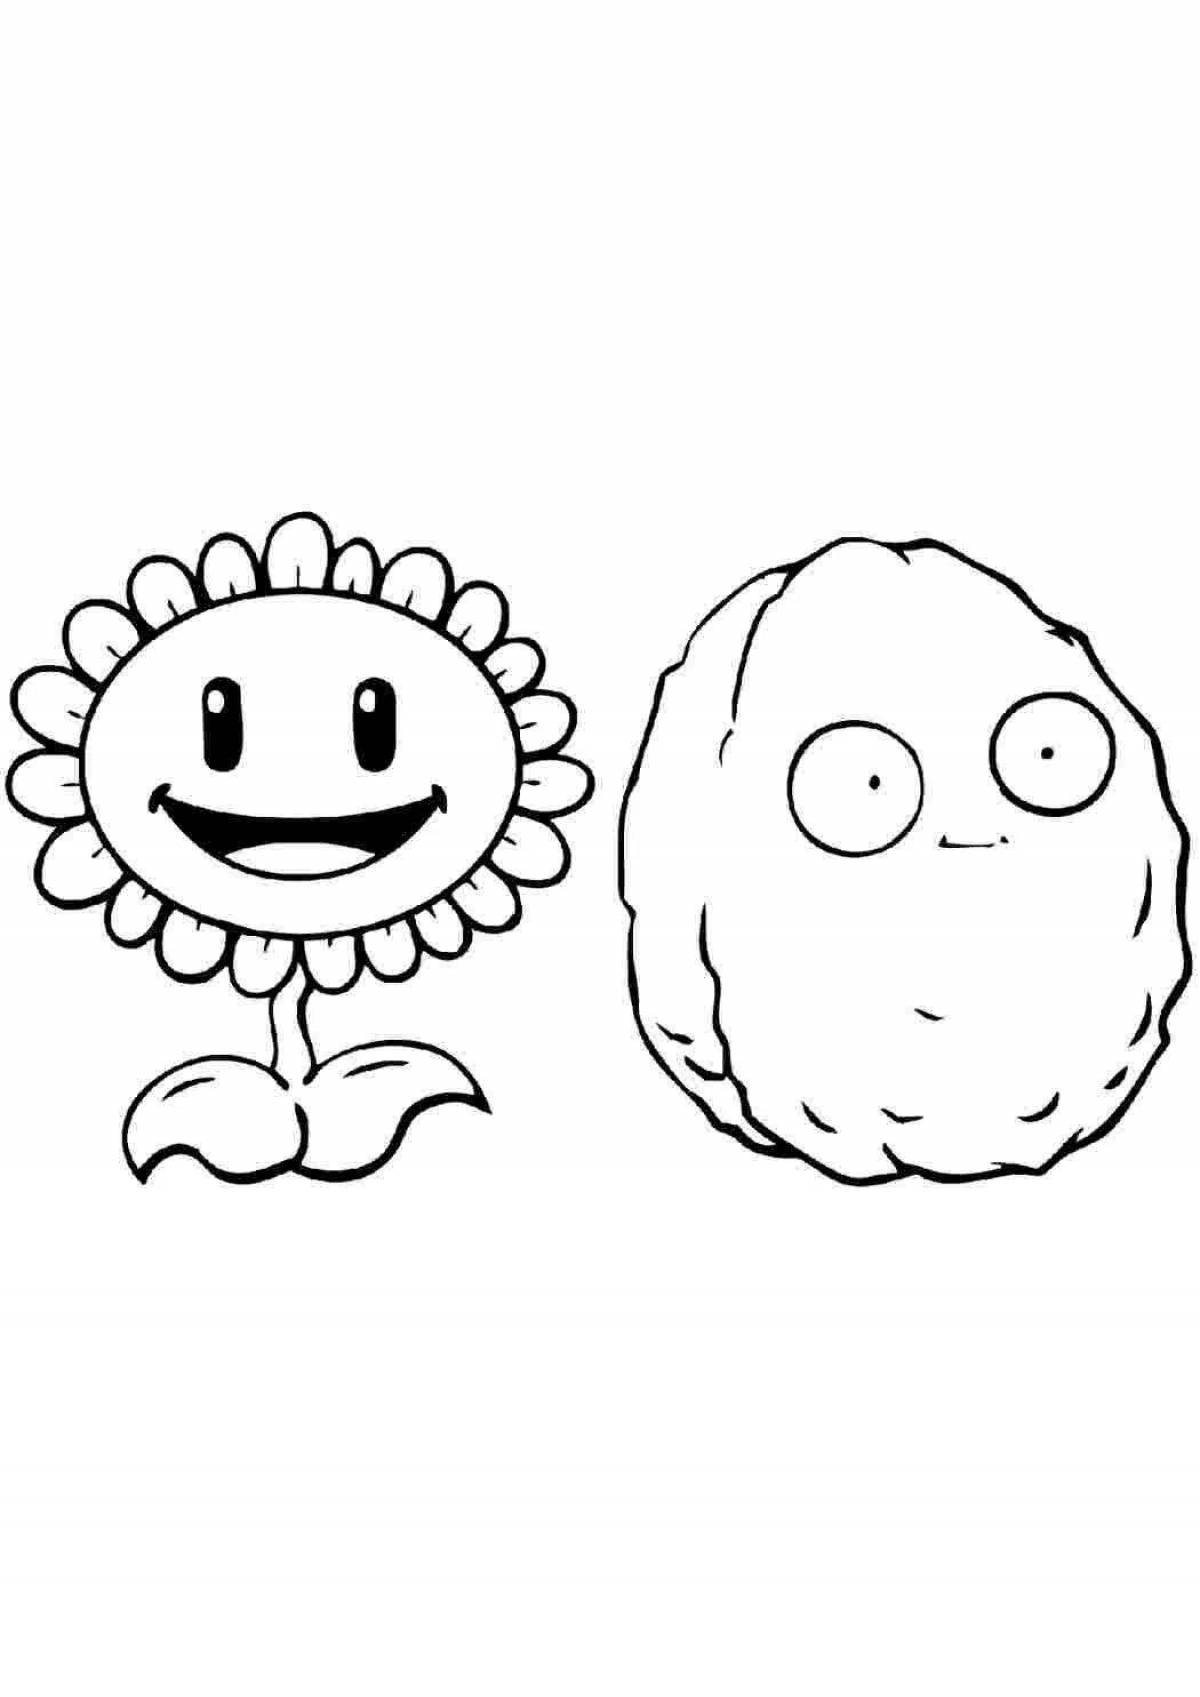 Colorful coloring plants vs zombies sunflowers